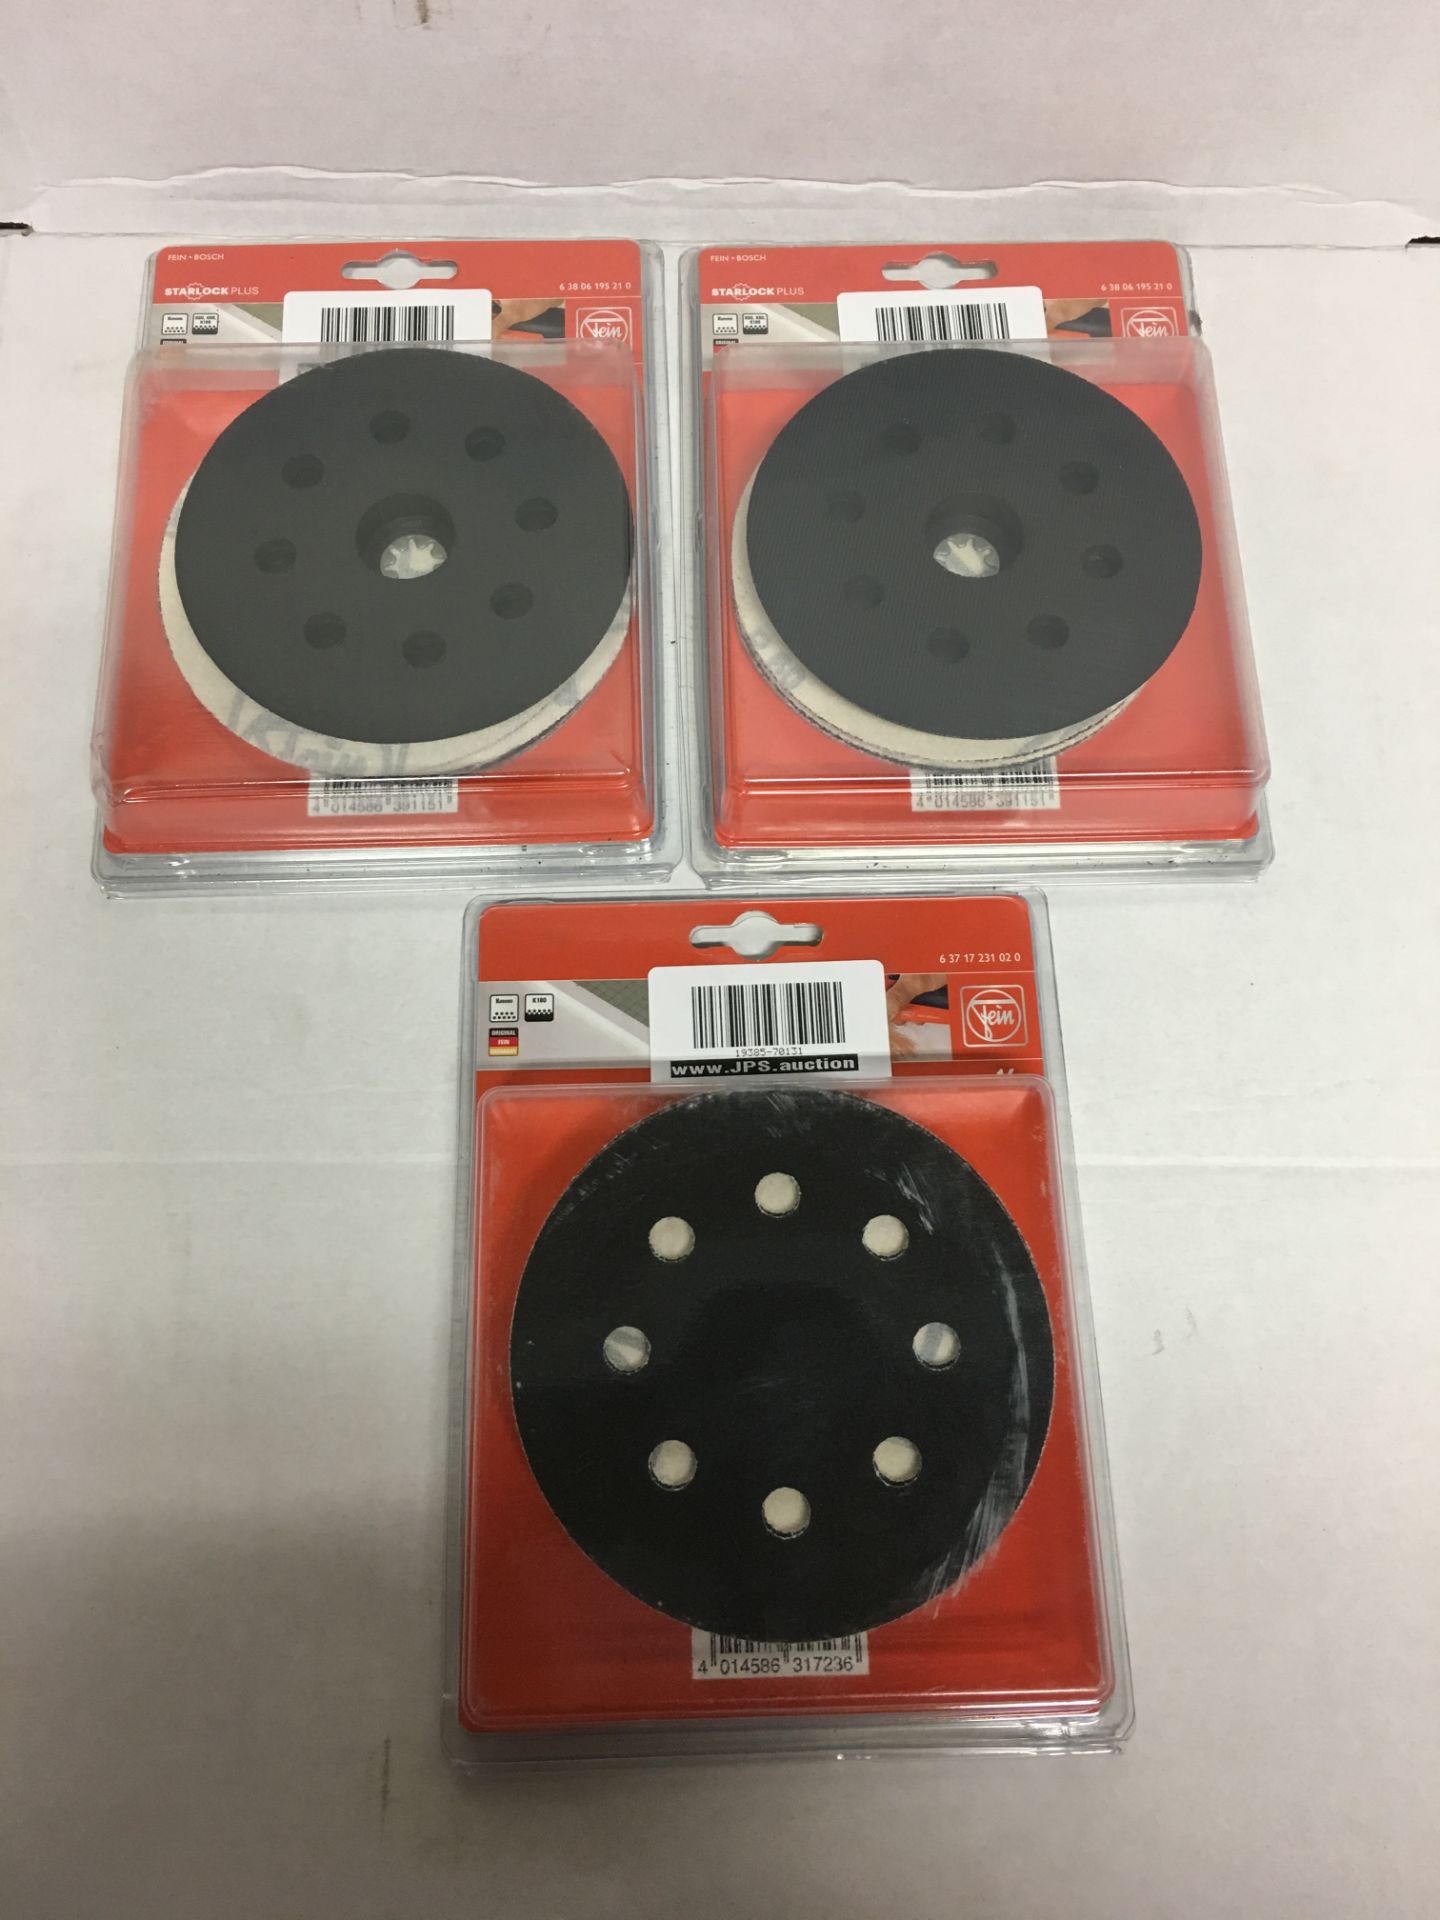 2 x Fein sanding disc and sanding sheets, as listed | RRP £ 39